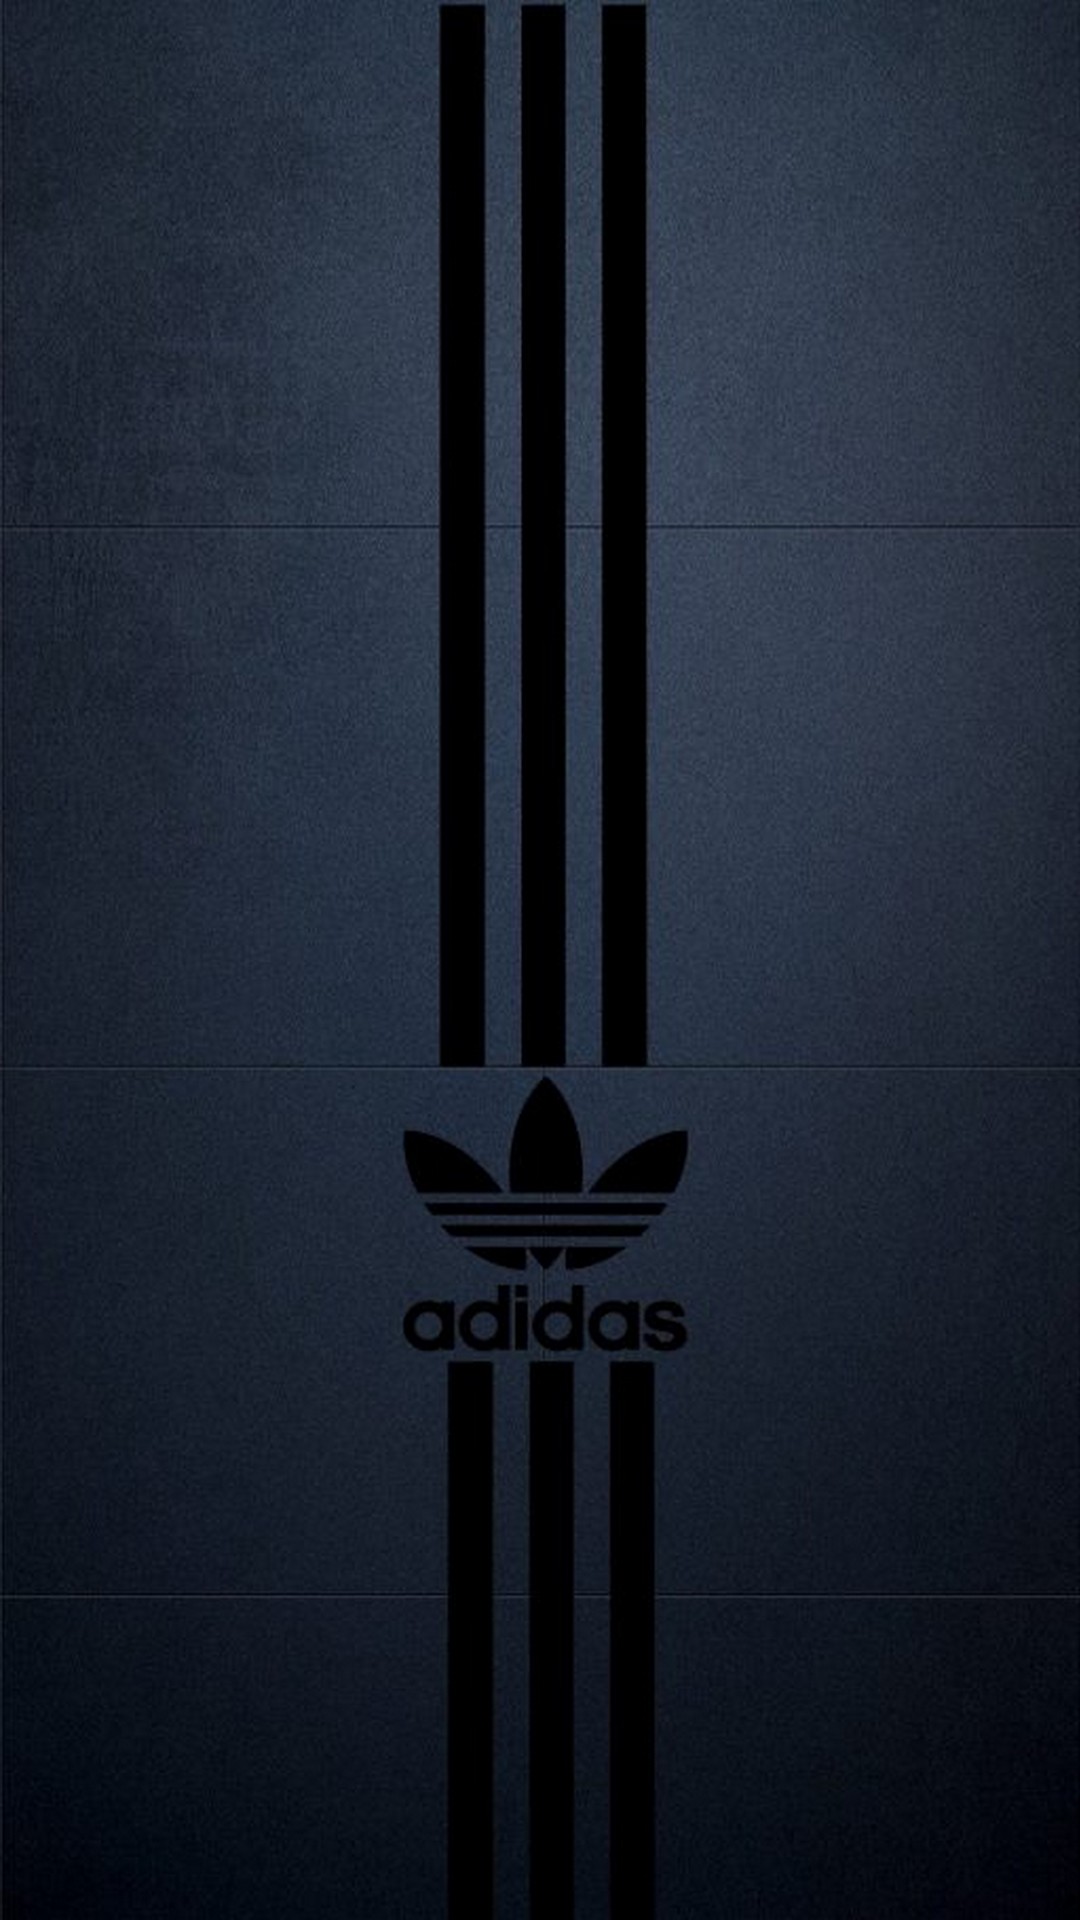 iPhone Wallpaper HD Adidas With high-resolution 1080X1920 pixel. You can use this wallpaper for your Desktop Computer Backgrounds, Mac Wallpapers, Android Lock screen or iPhone Screensavers and another smartphone device